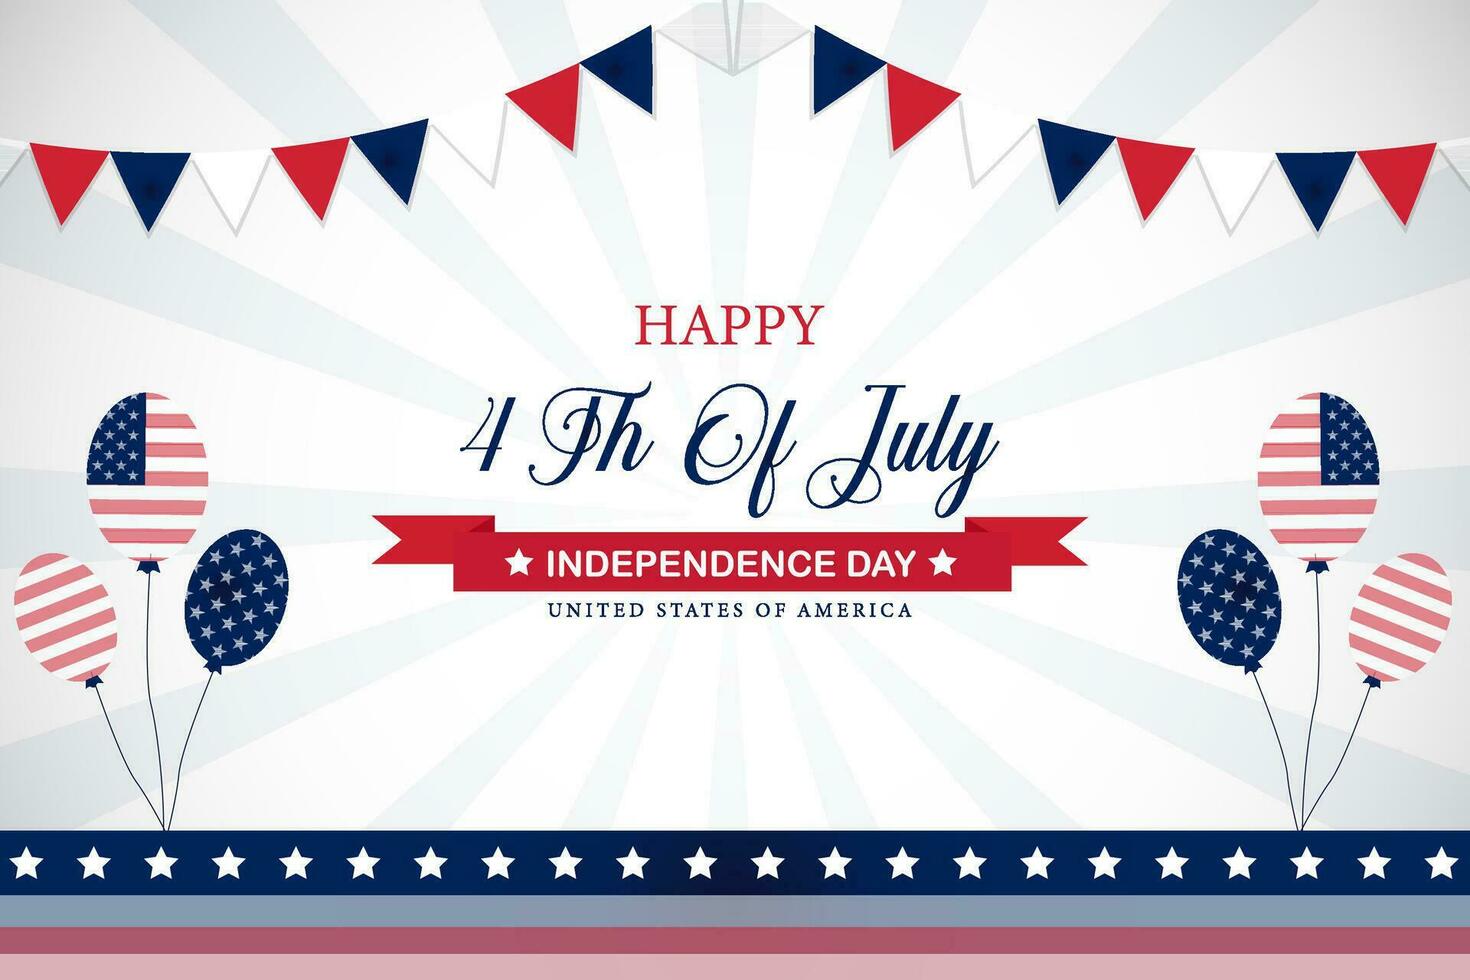 Vector illustration background for American 4th of July celebration